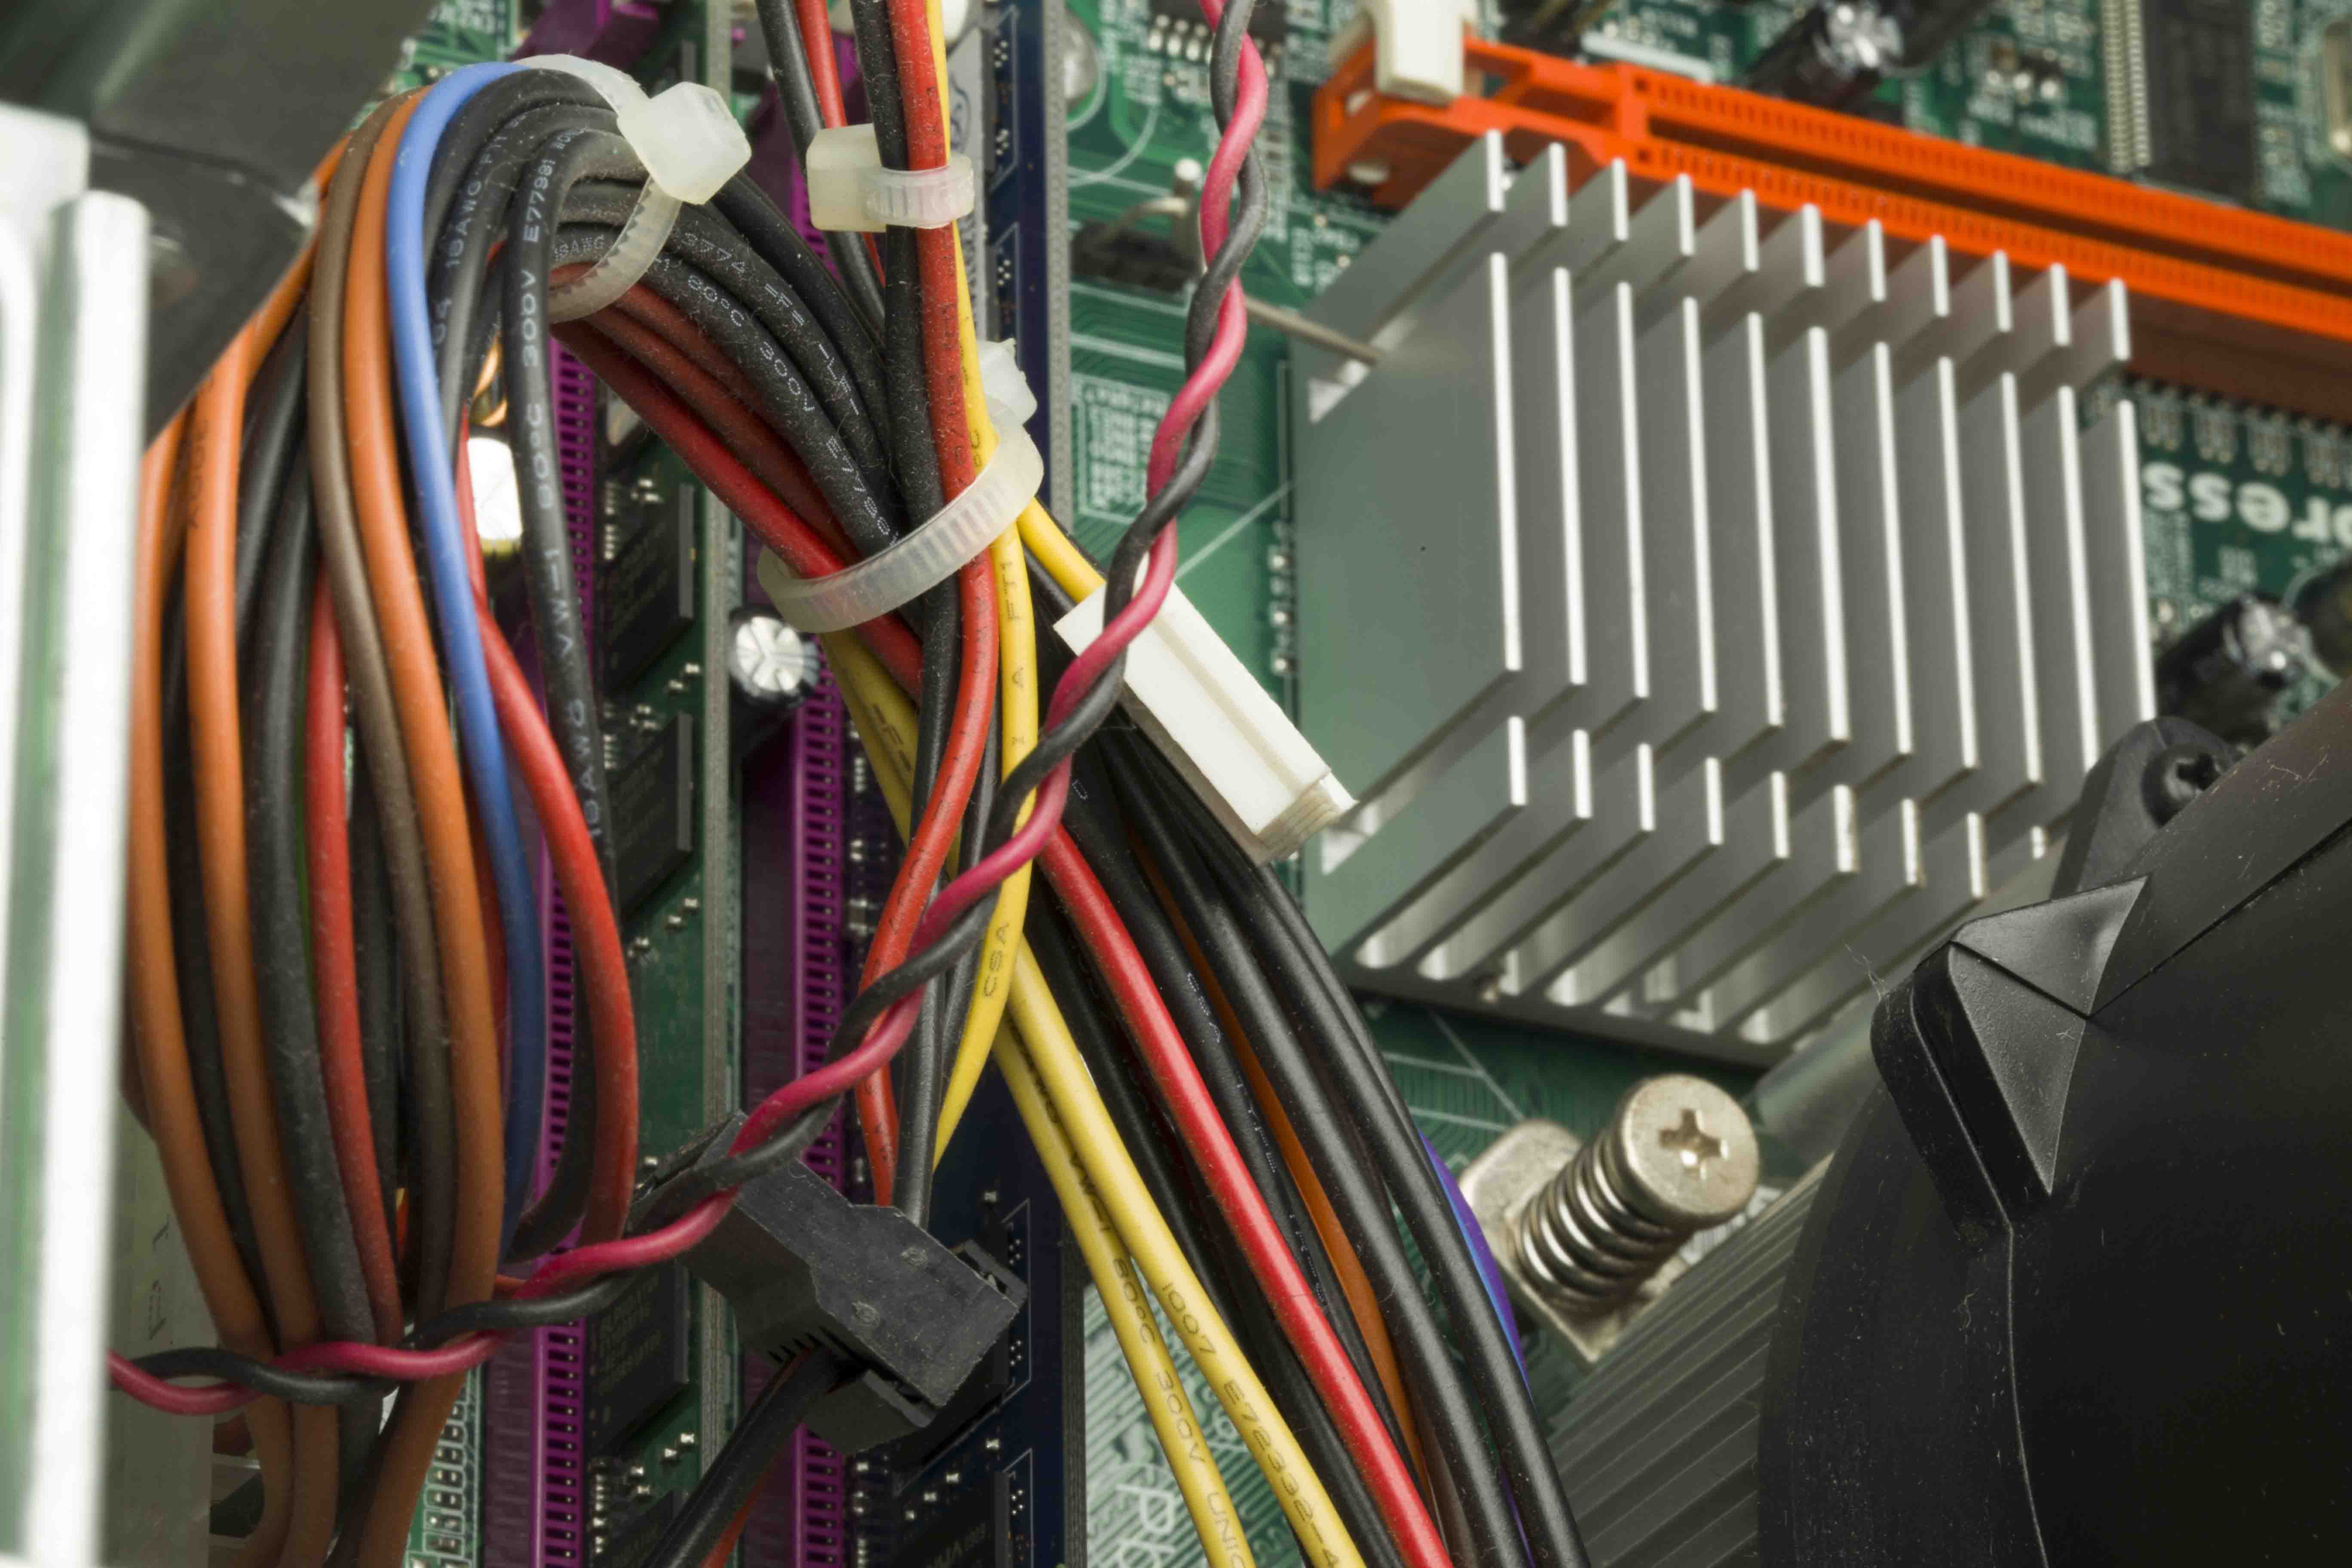 Keep Your Workplace Safe with Proper Cable Management Practices